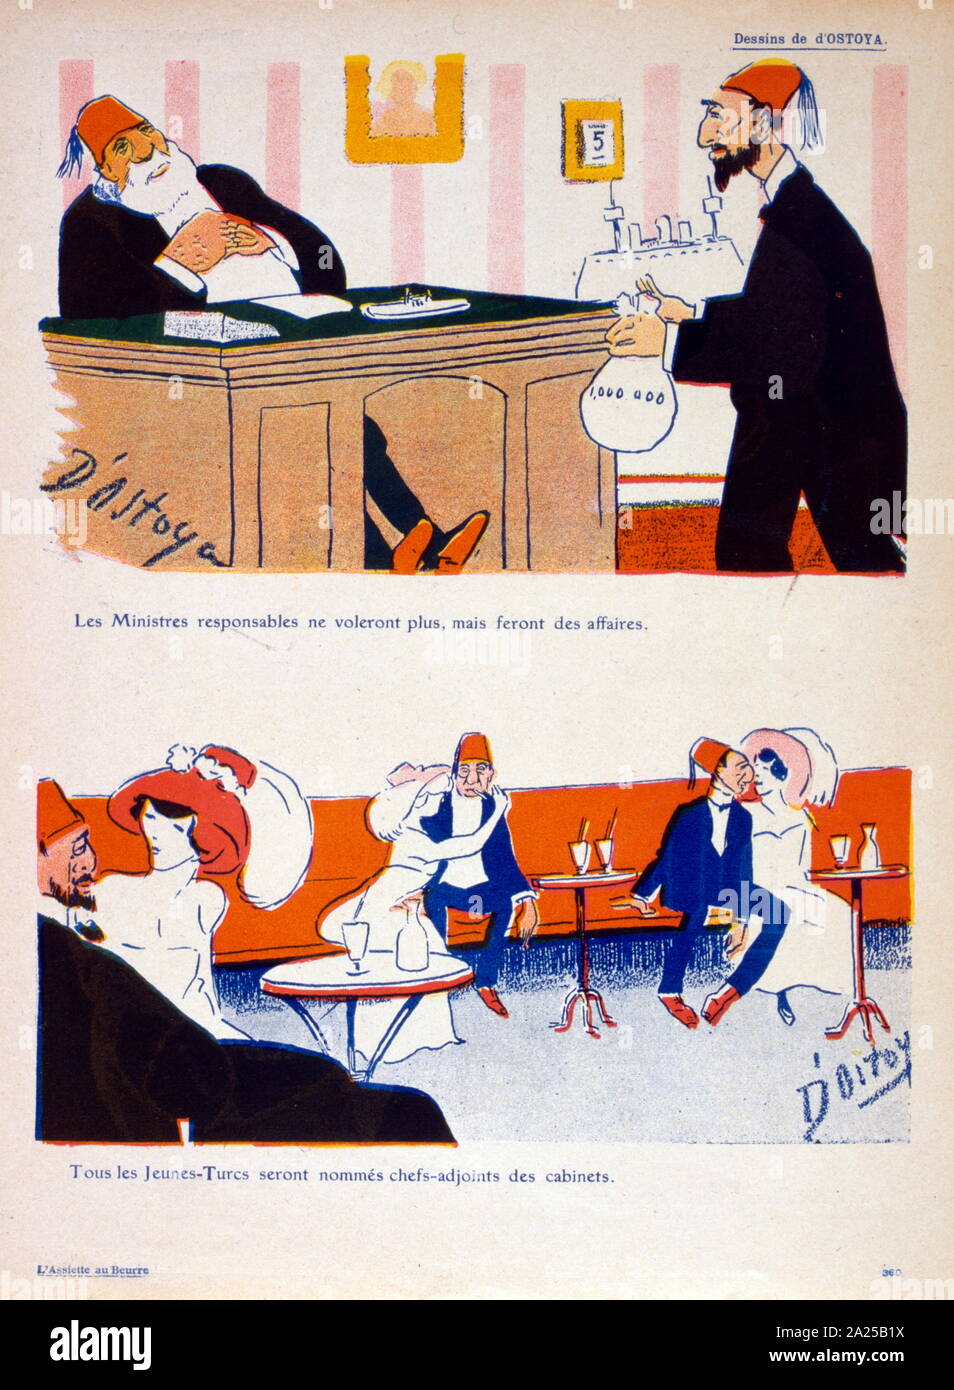 French satirical illustration, showing, corruption and vice in Turkey, before the Young Turk Revolution (July 1908) deposing Sultan Abdul Hamid II, of the Ottoman Empire Stock Photo